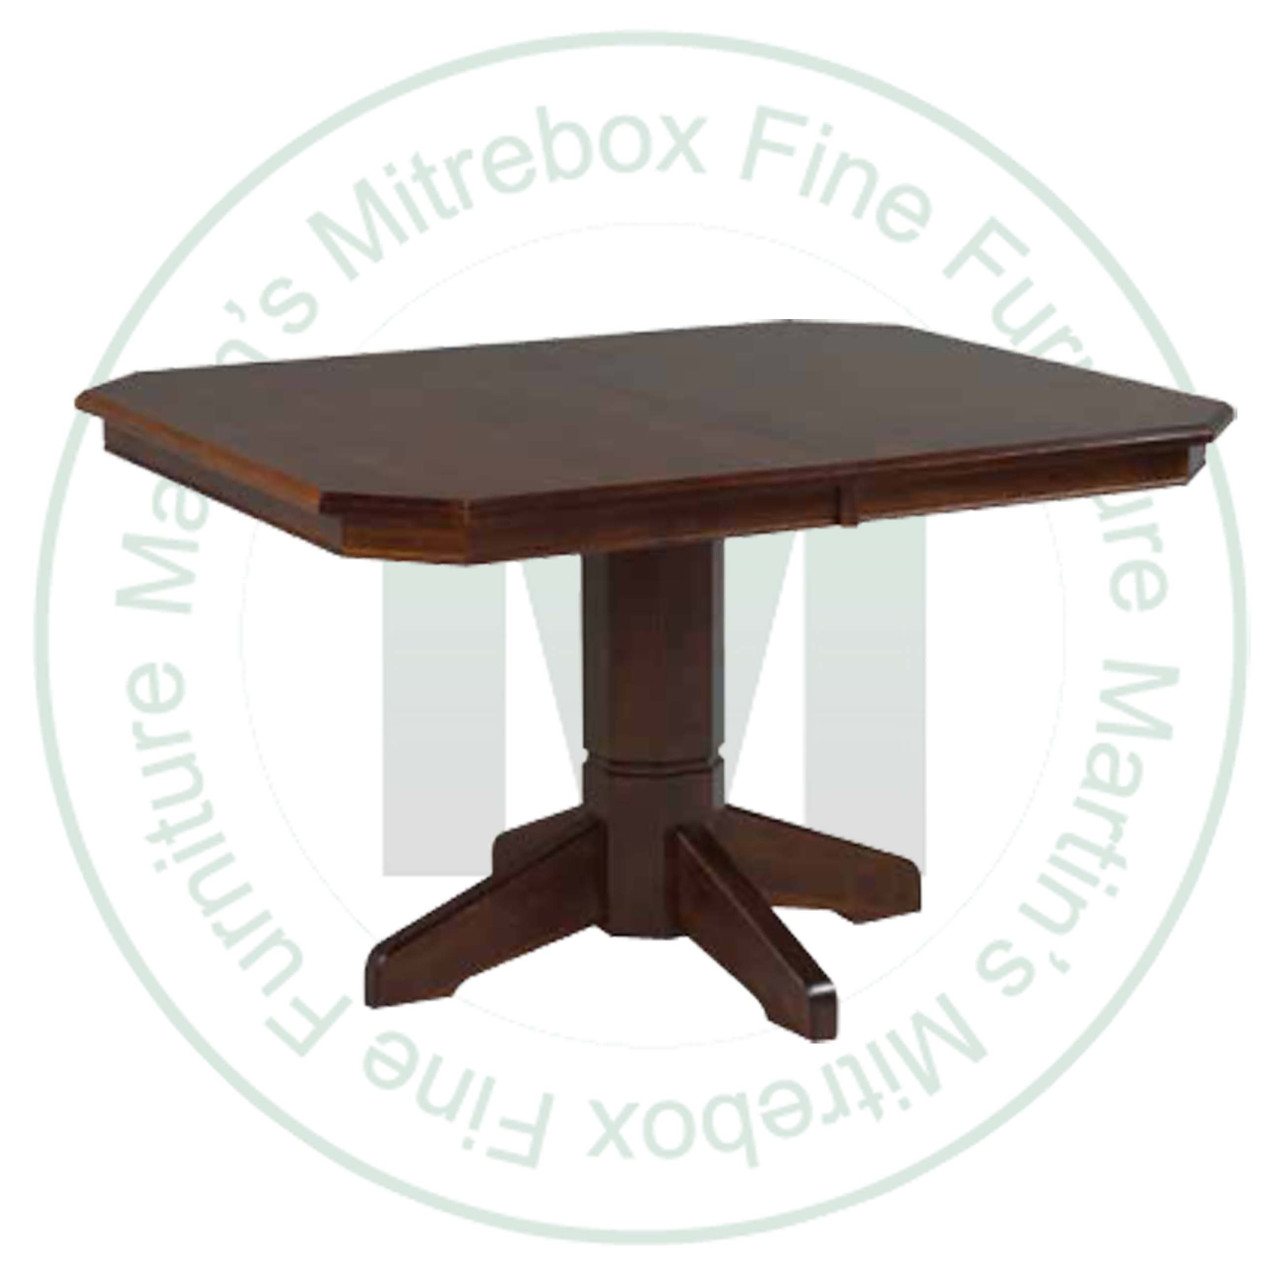 Maple Midtown Single Pedestal Table 54''D x 54''W x 30''H Solid Top